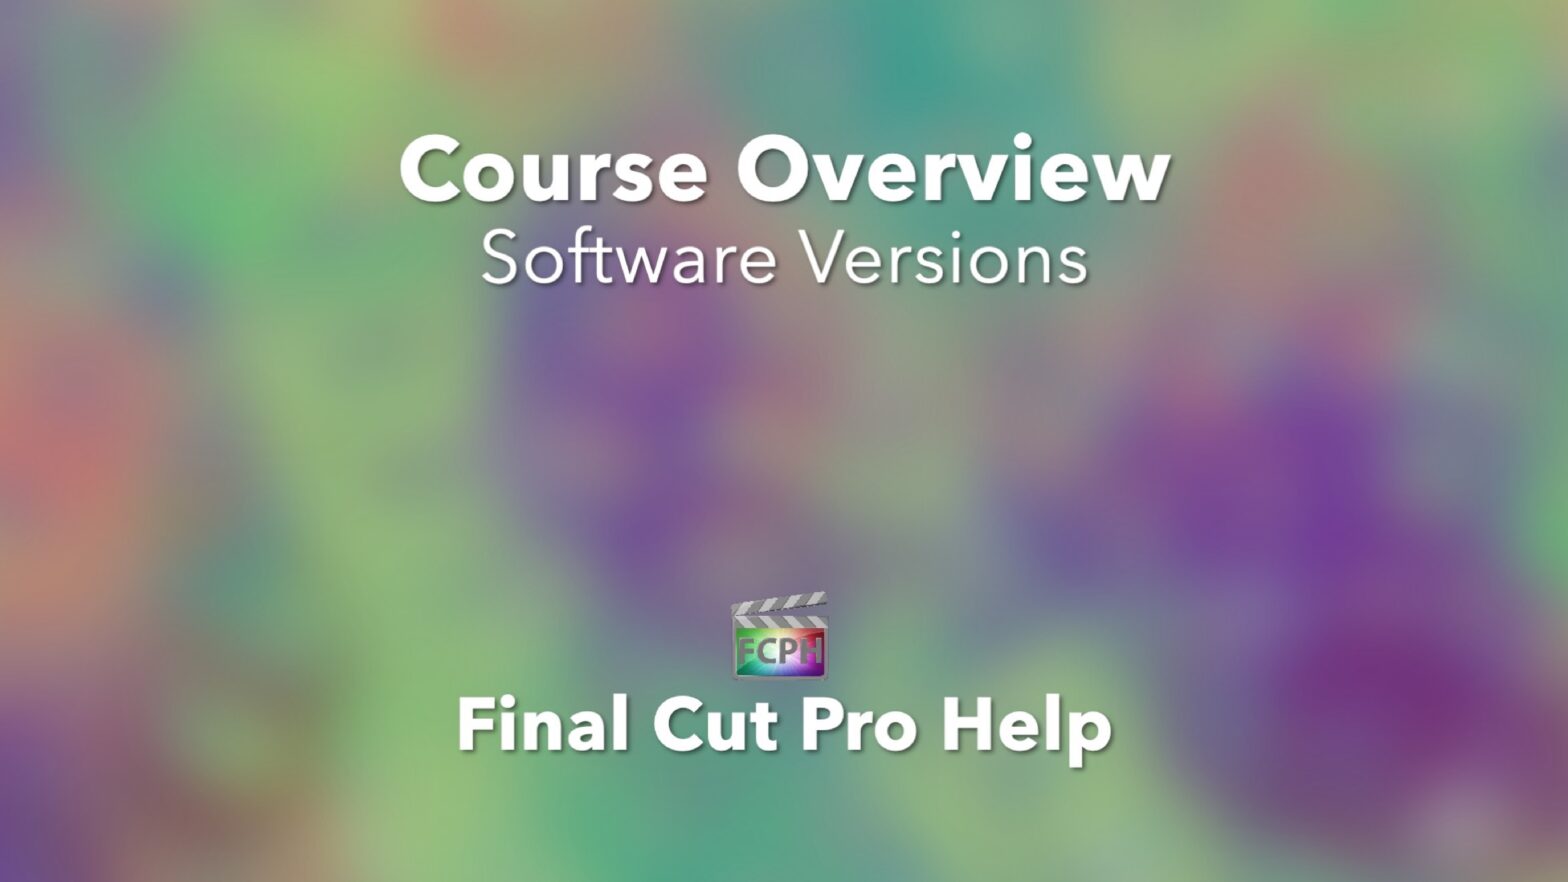 Get Started with Final Cut Pro: Versions of Final Cut and macOS used in this course